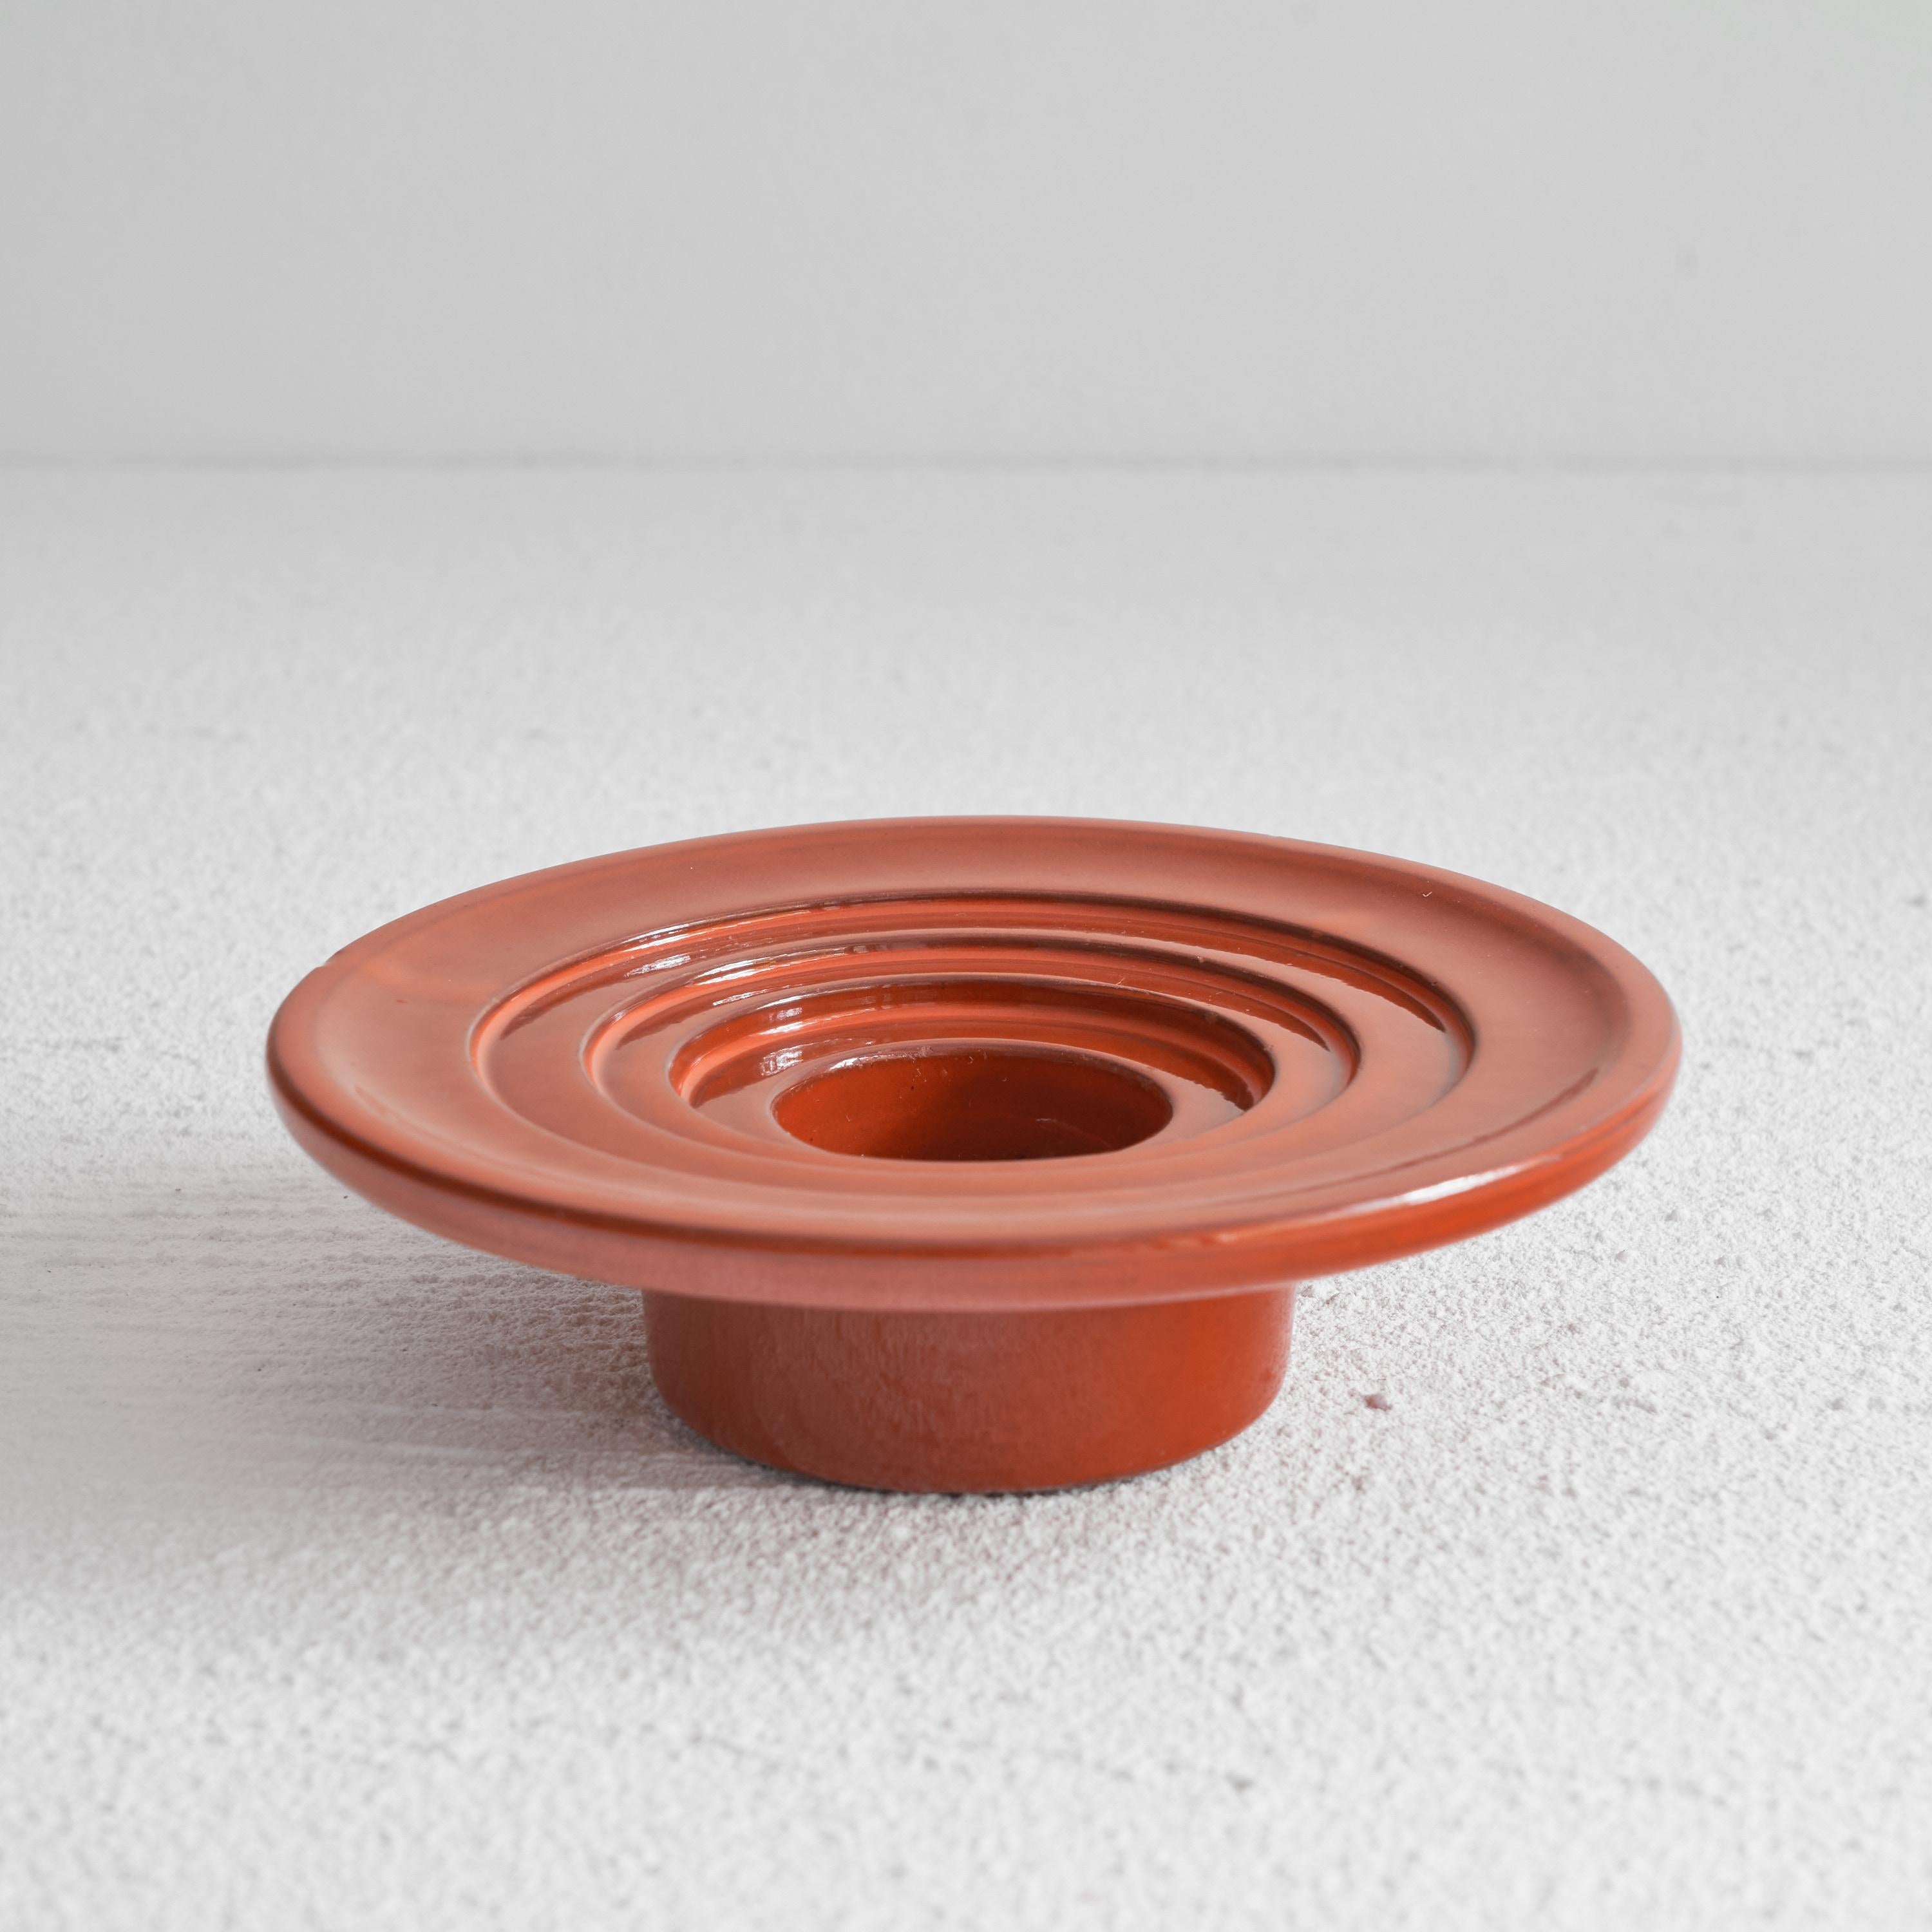 Orange glazed ceramic candle holder or decorative bowl. Mid 20th century. 

Eye catching orange glazed ceramic candle holder with a very distinct style. A studio pottery piece which was hand made somewhere in the middle of the last century. In